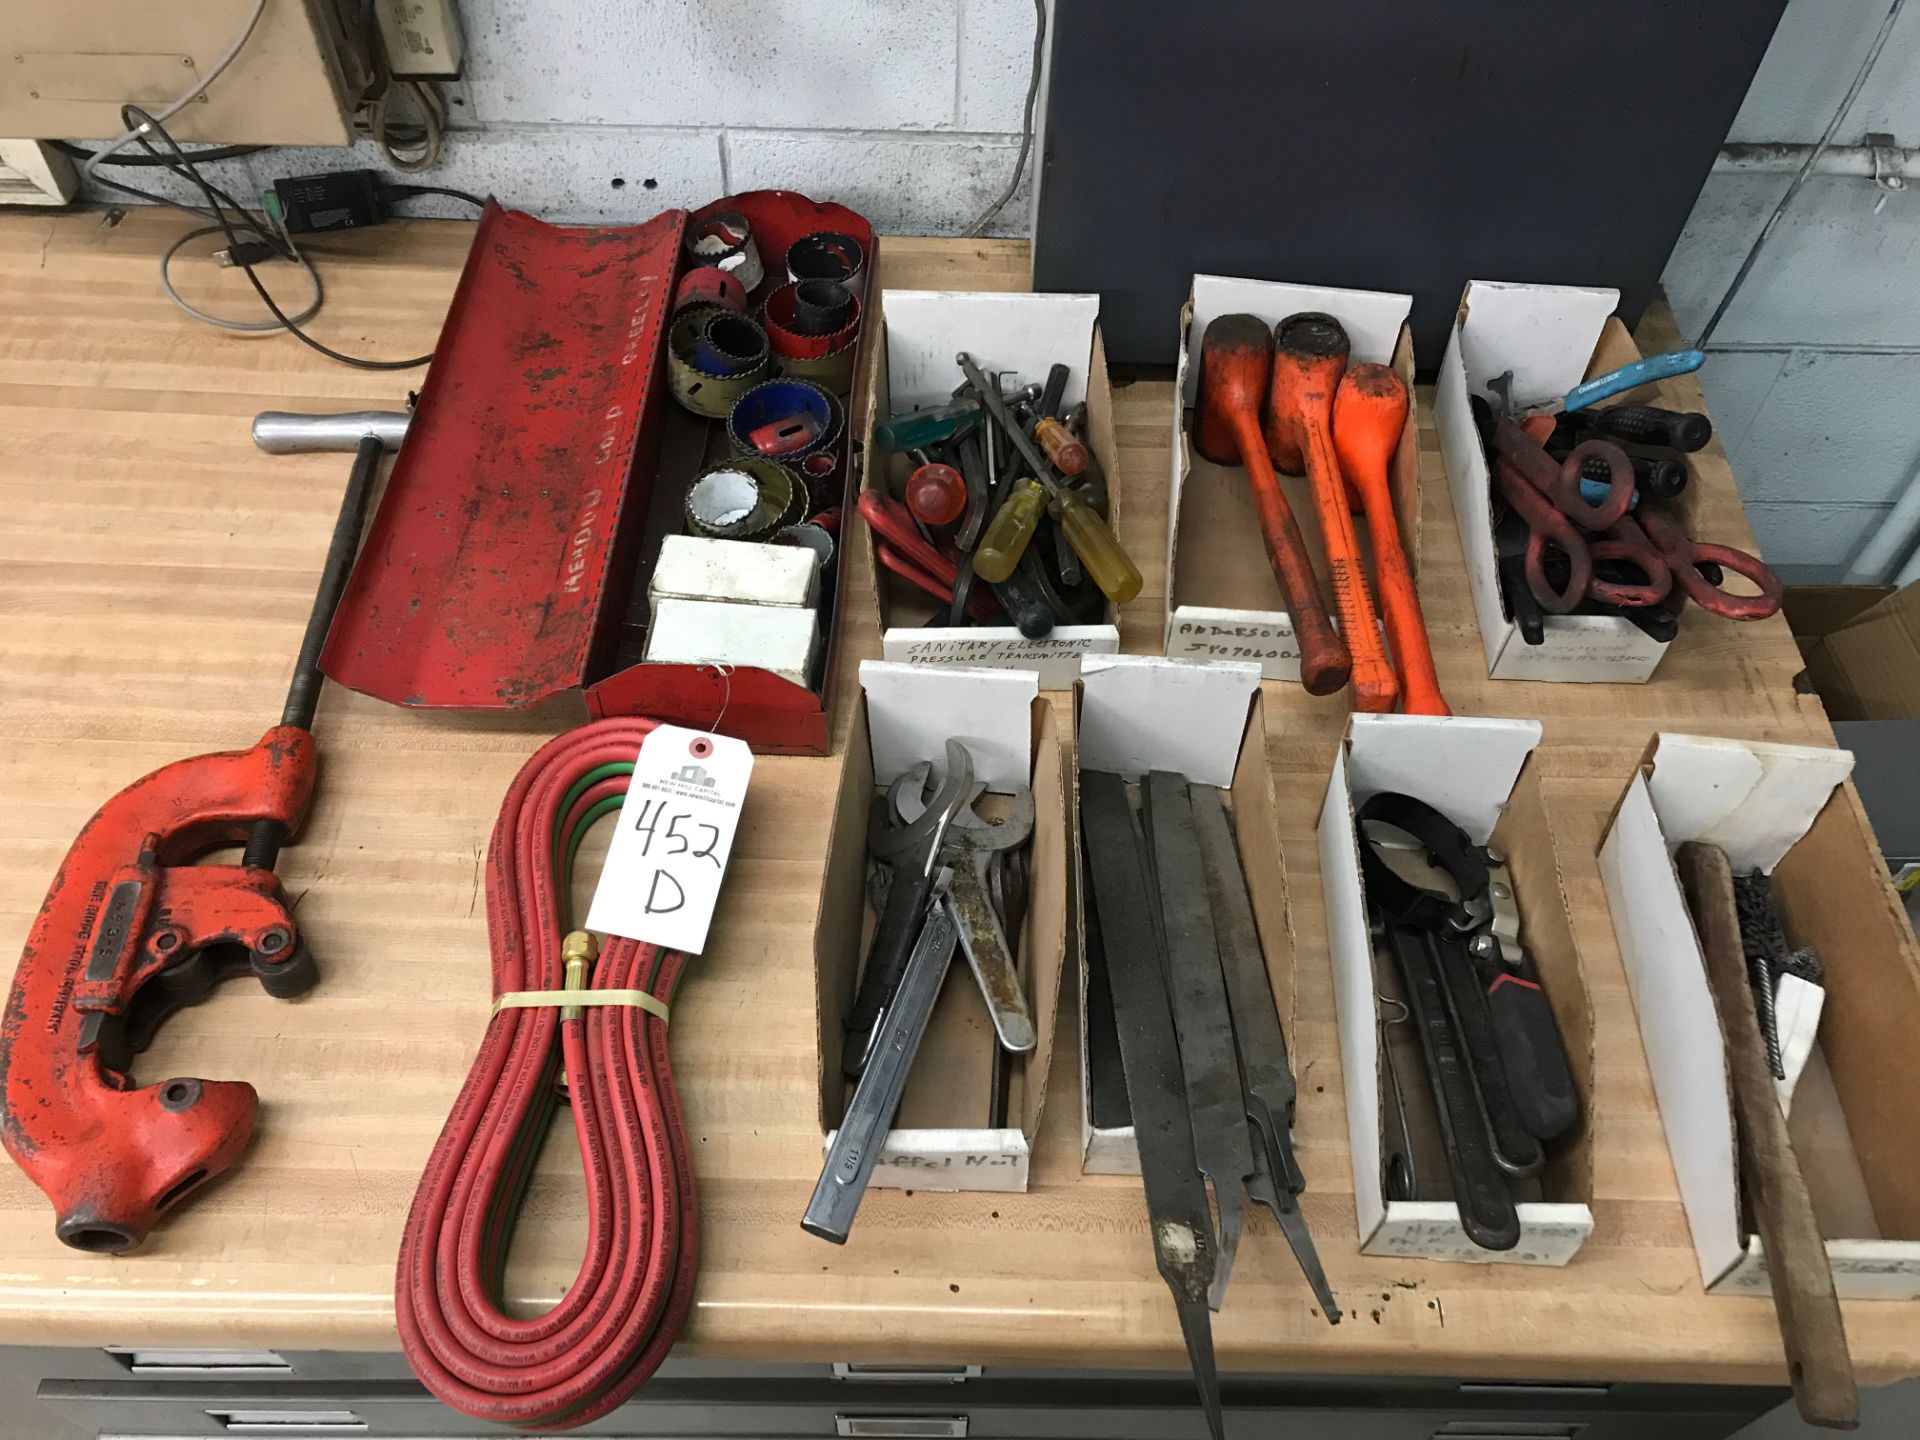 HAMMERS, FILES, WRENCHES, ALLEN WRENCHES, TIN SNIPS, PIPE CUTTER | Rig Fee: $10